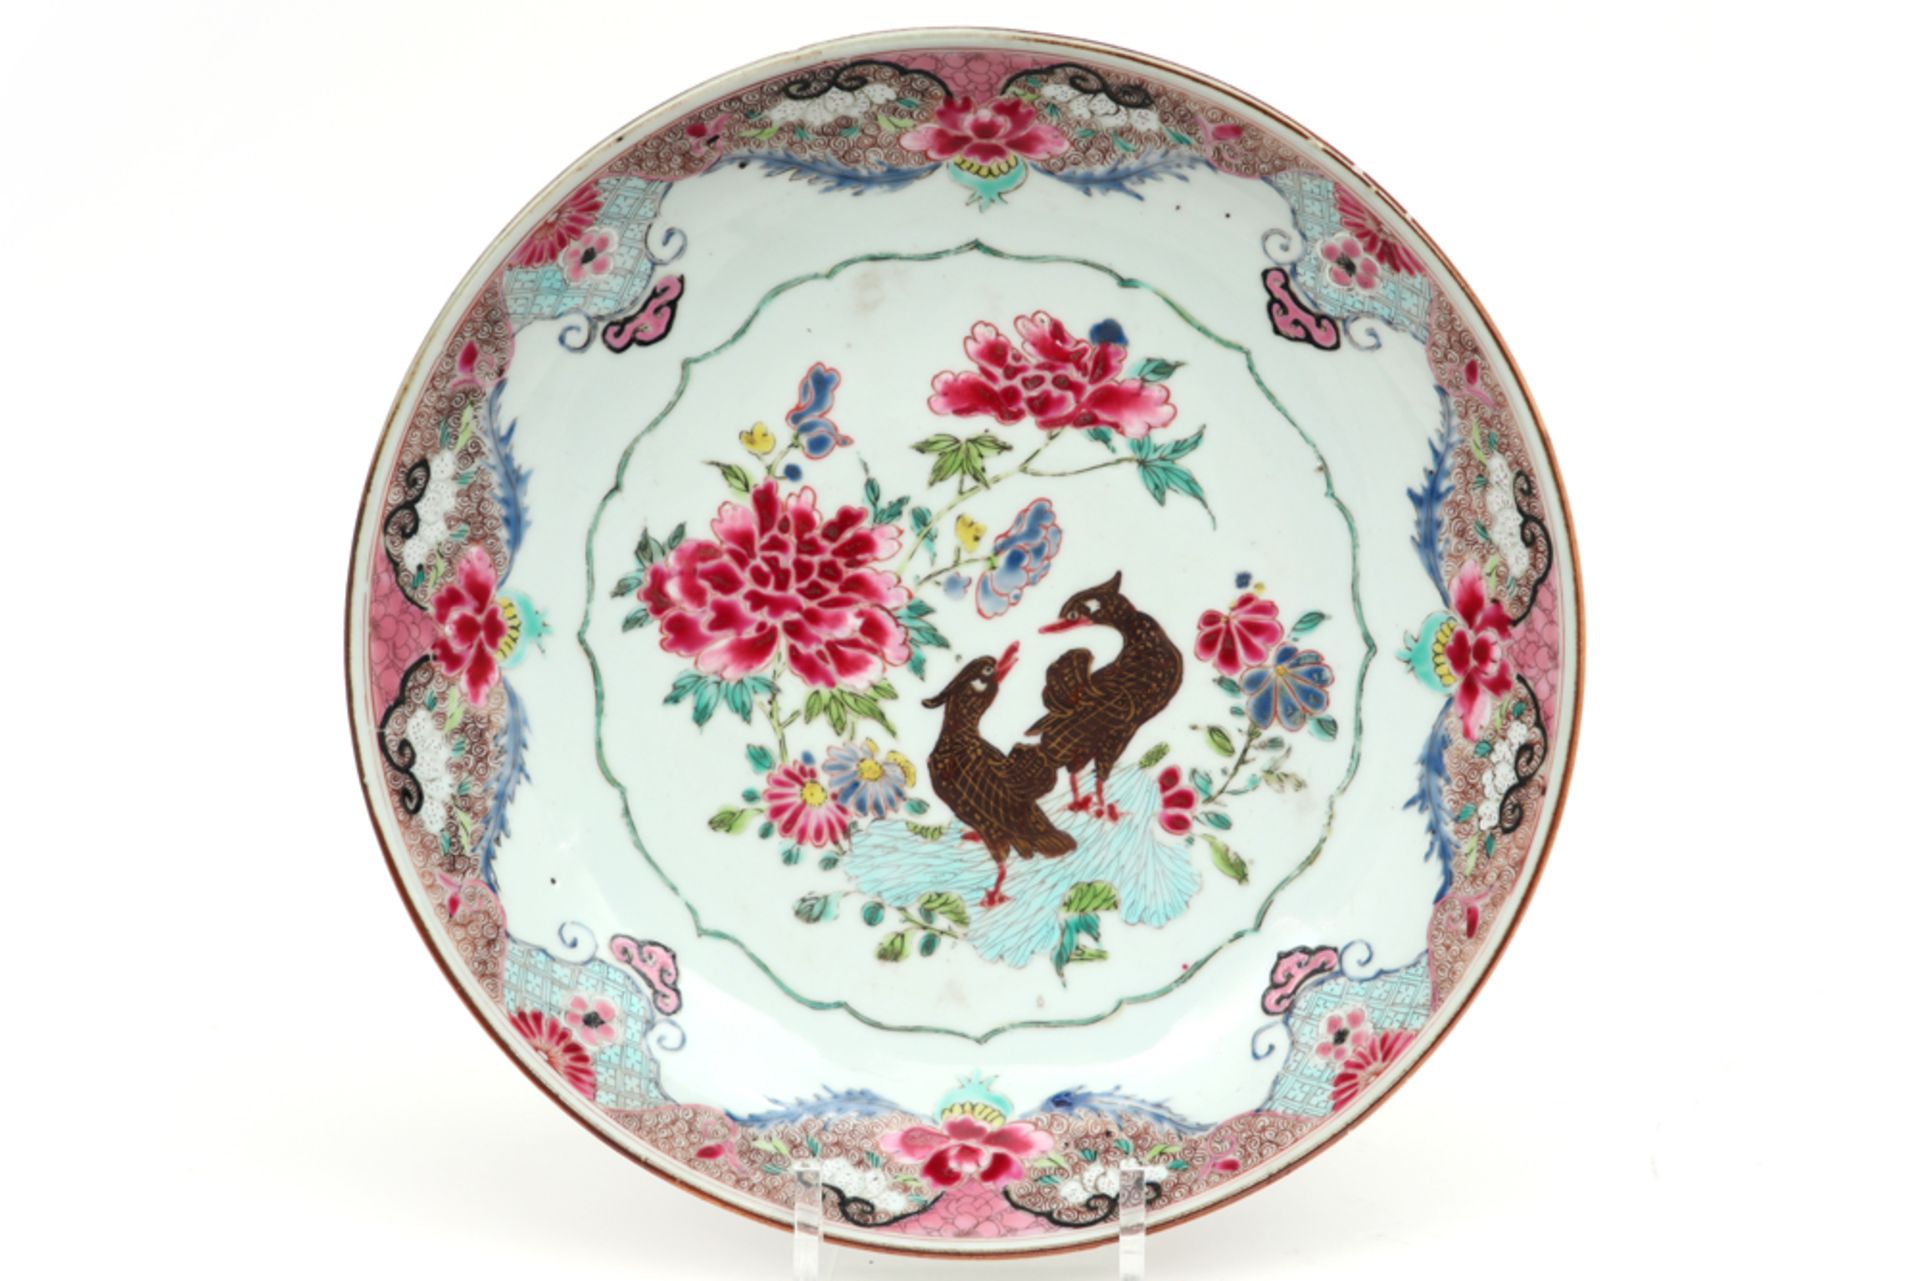 18th Cent. Chinese dish in porcelain with a Famille Rose decor with flowers and birds ||